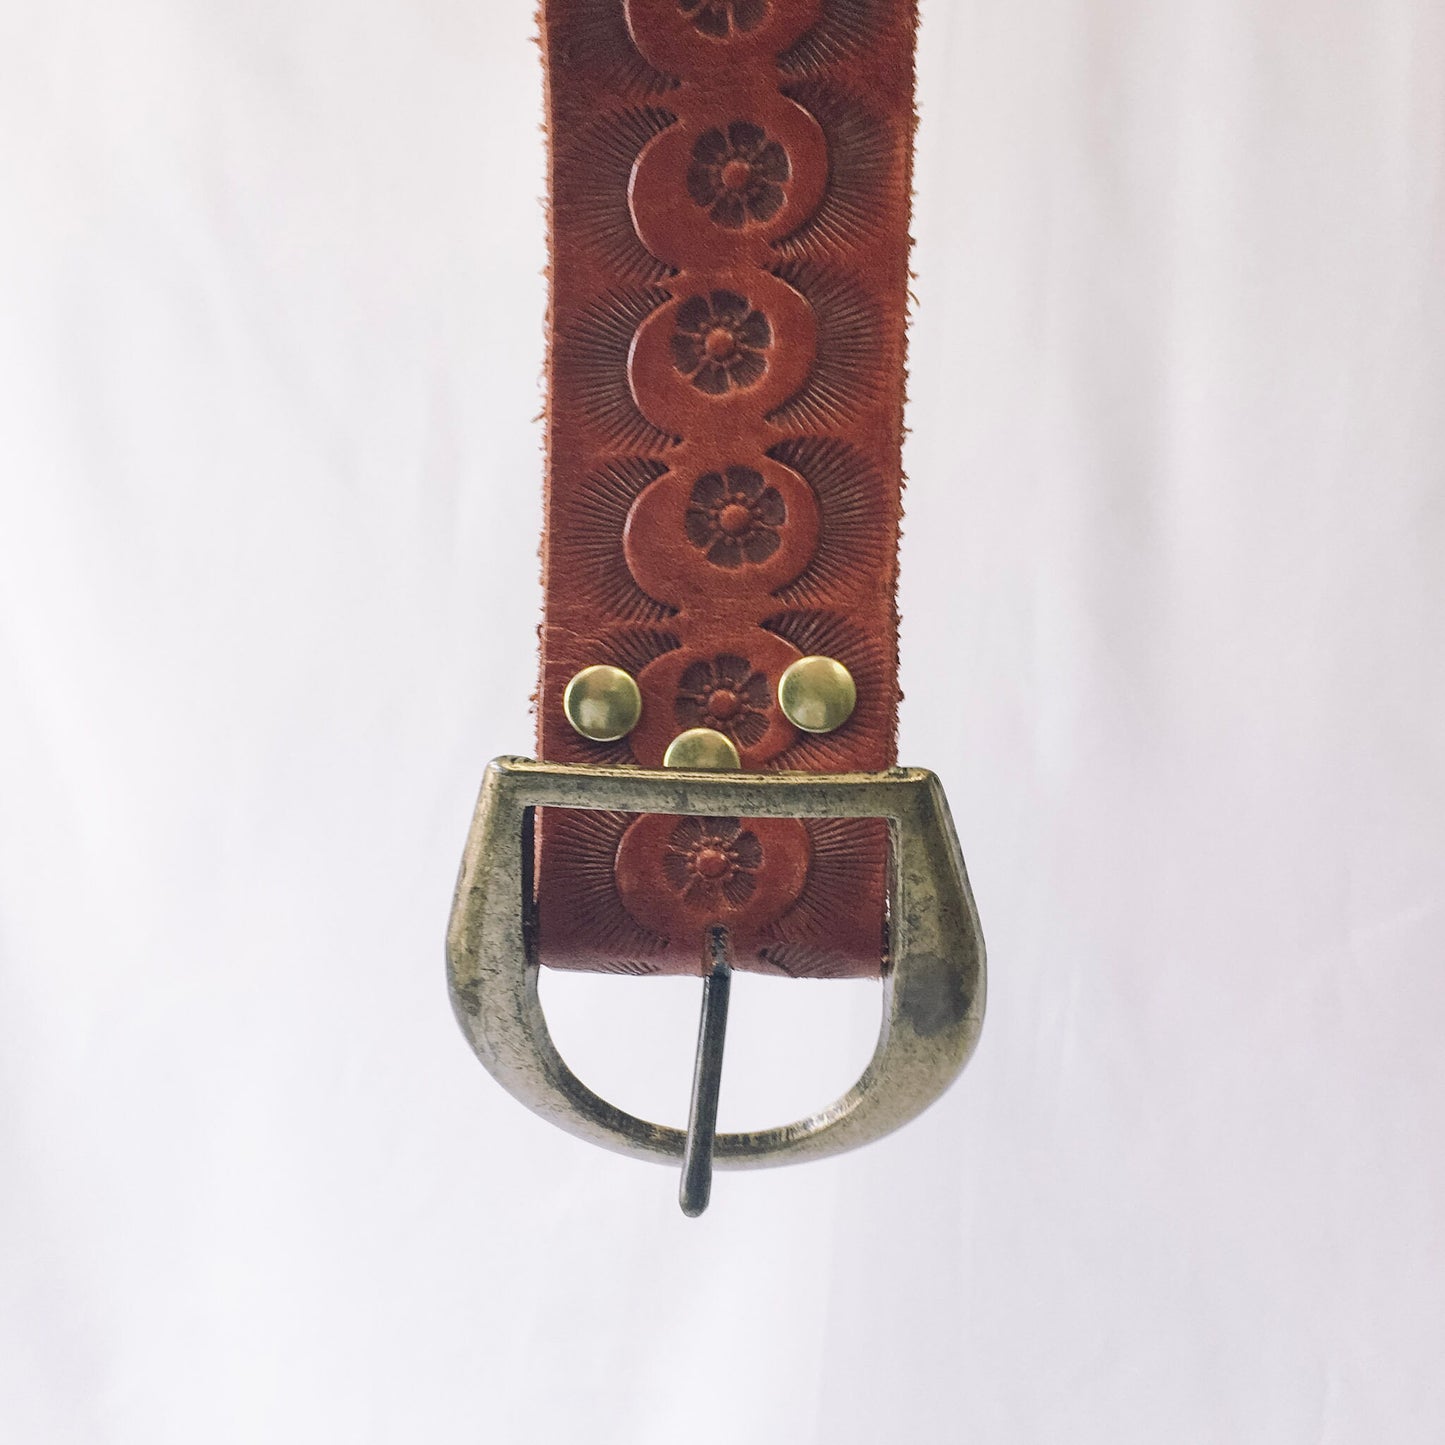 Vintage Tooled Leather Belt, Gold Horseshoe Buckle Belt with floral and engraved detail: "Foxy Lady"